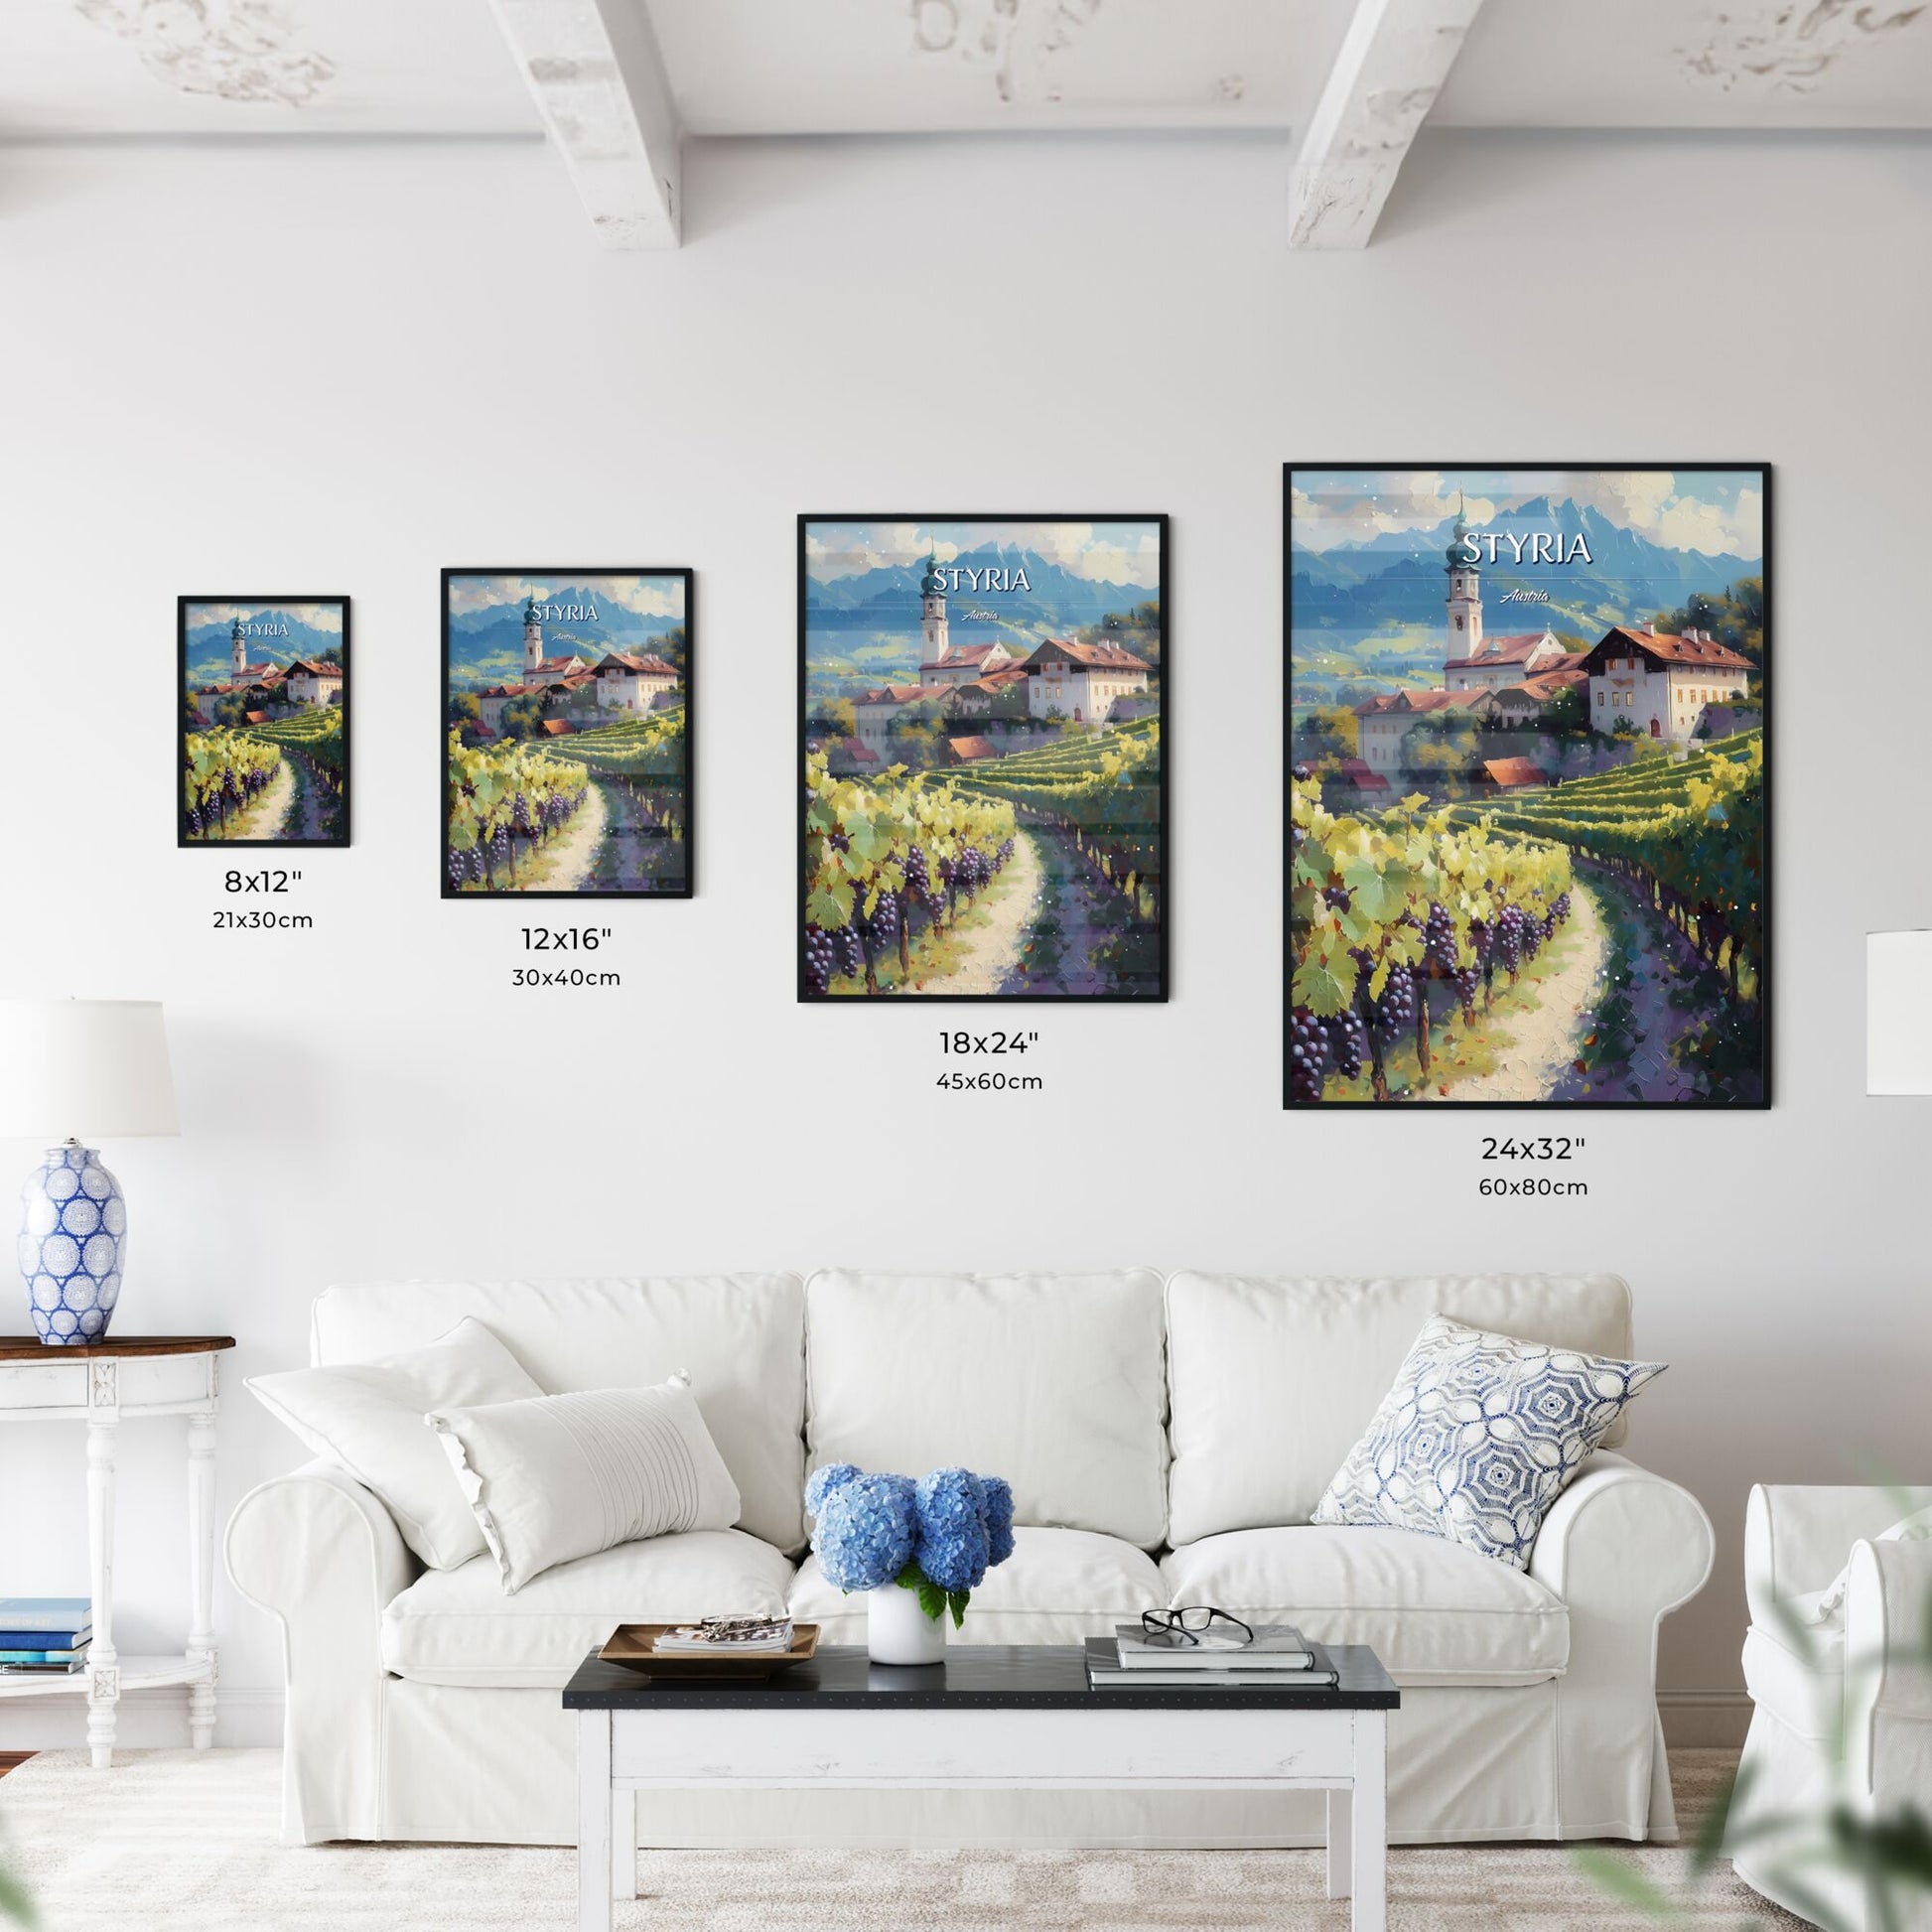 Styria, Austria - Art print of a painting of a village by a lake with fall colors Default Title